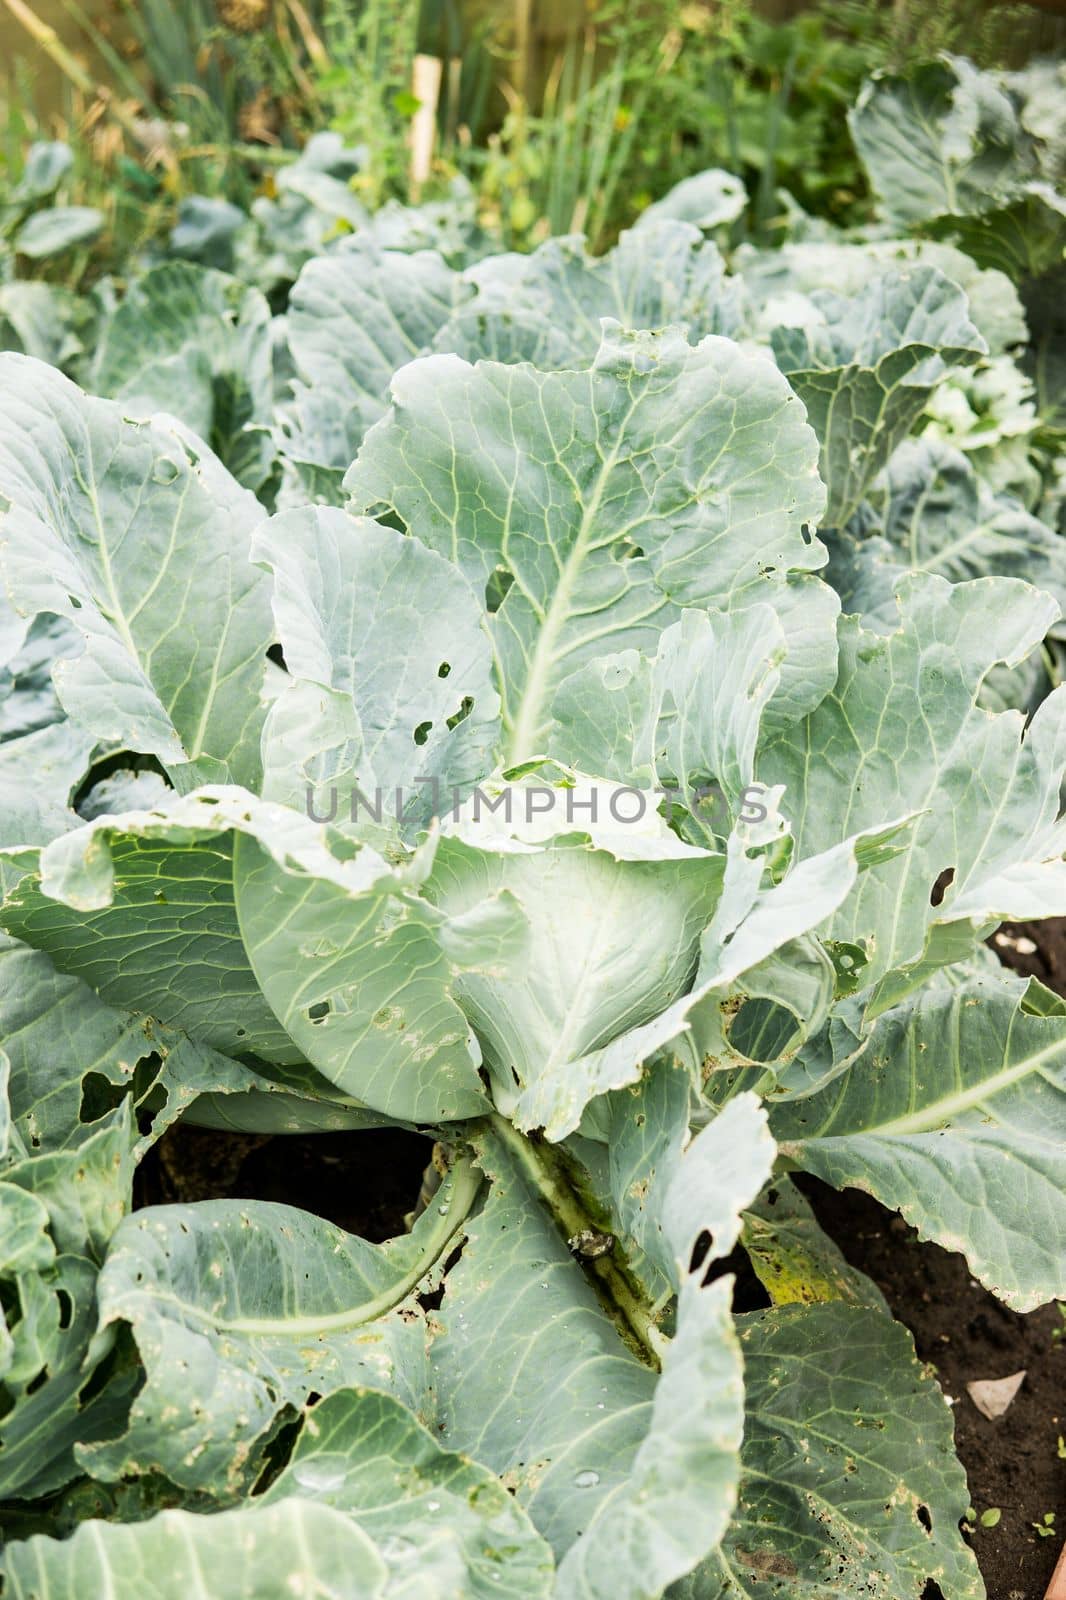 Cabbage grows in the garden. Harvesting cabbage. Life in the village